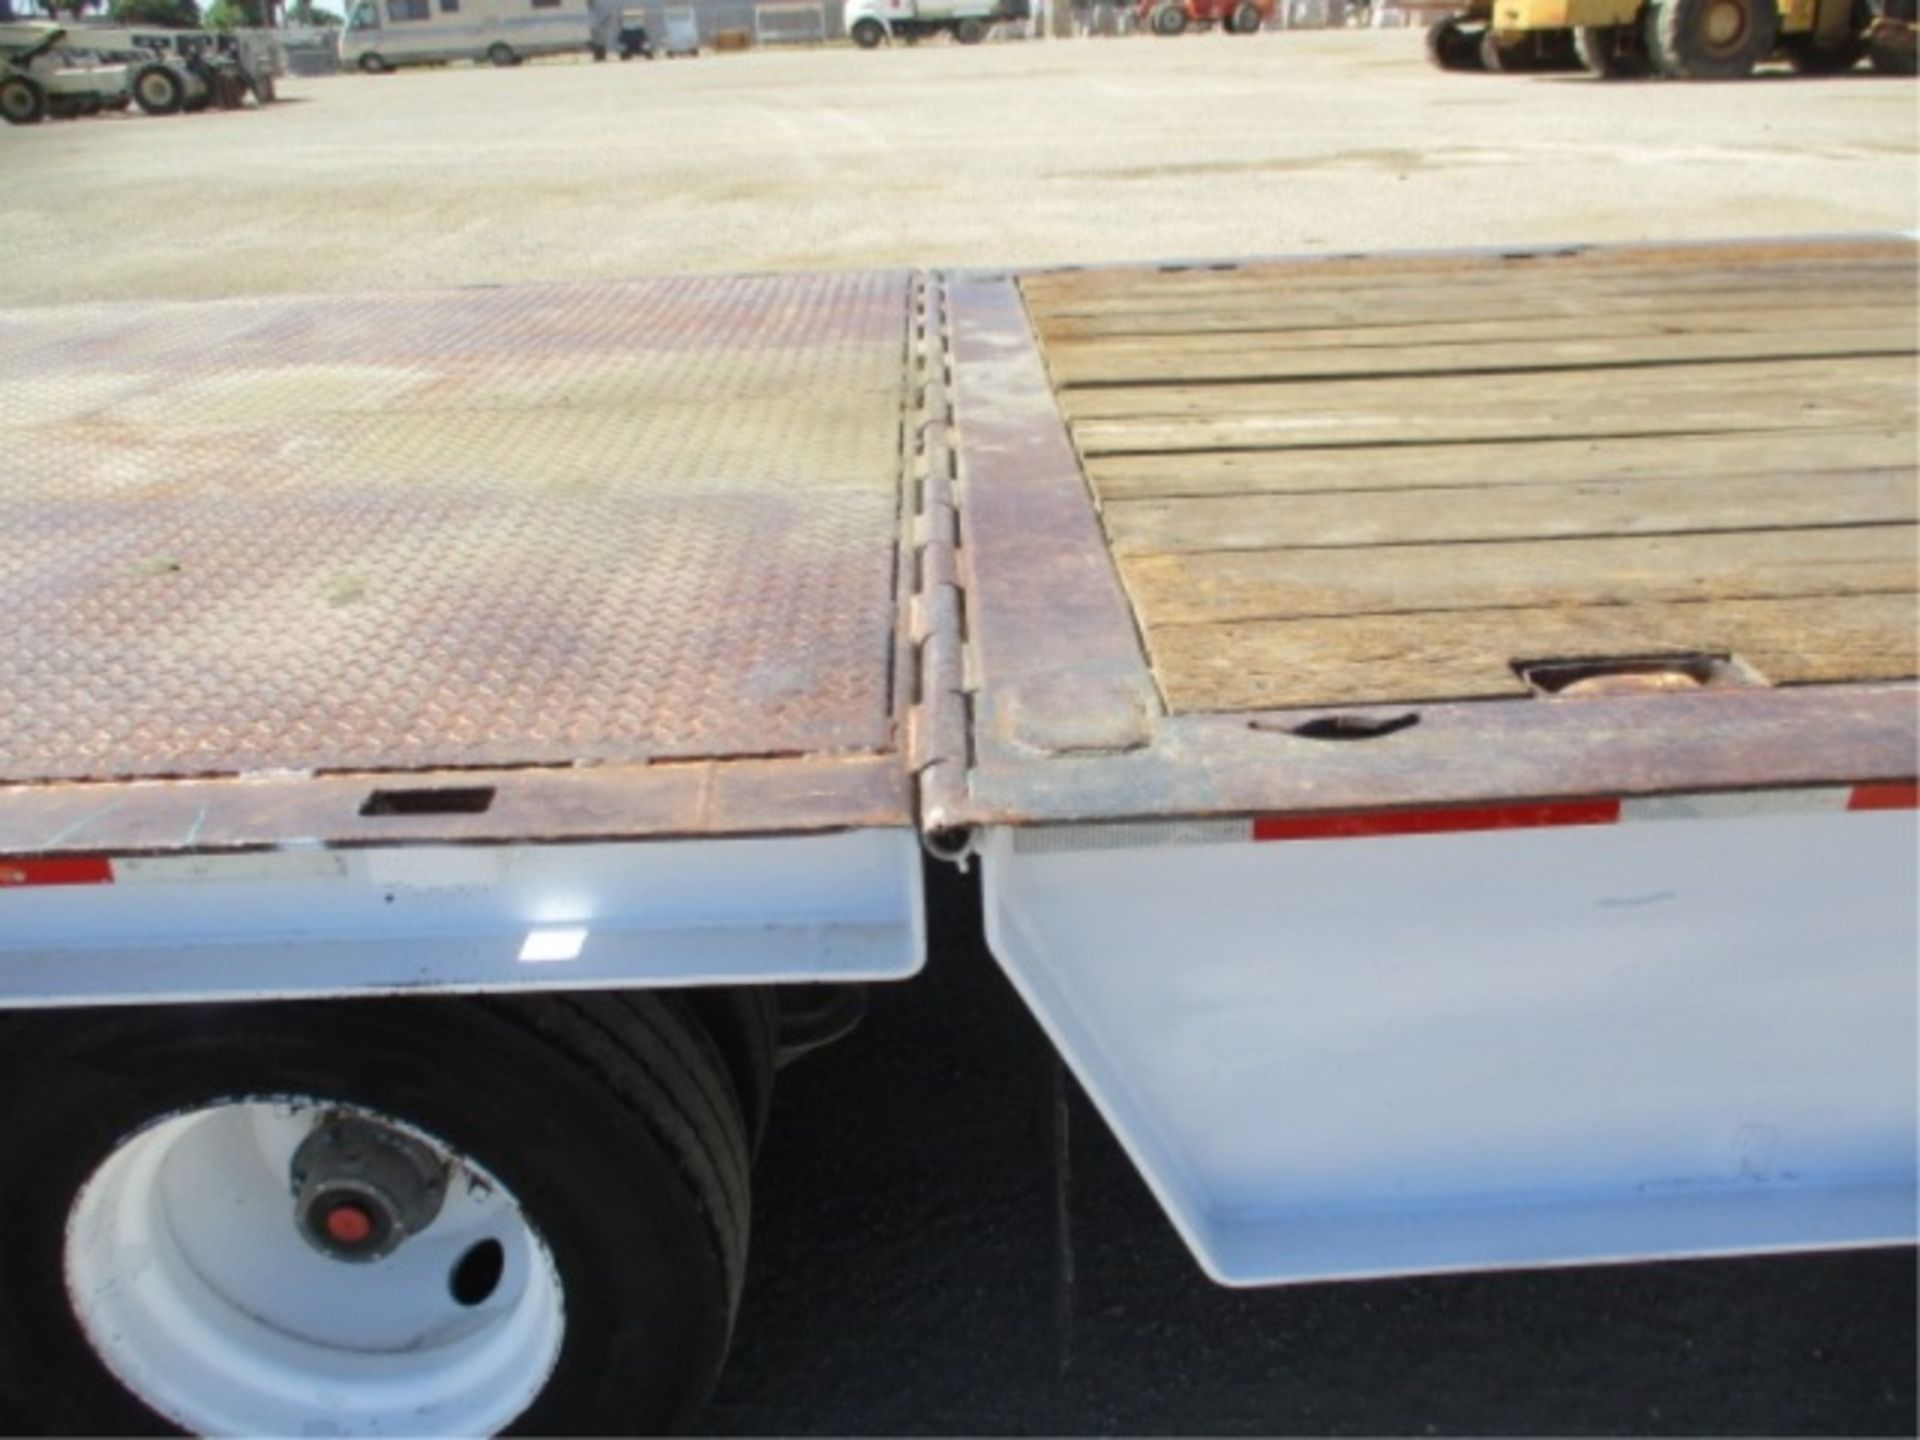 2000 Trail King TK70HT-482 T/A Equipment Trailer, 48', Wood Deck, Hydraulic Dove Tail, 10' Upper - Image 25 of 88